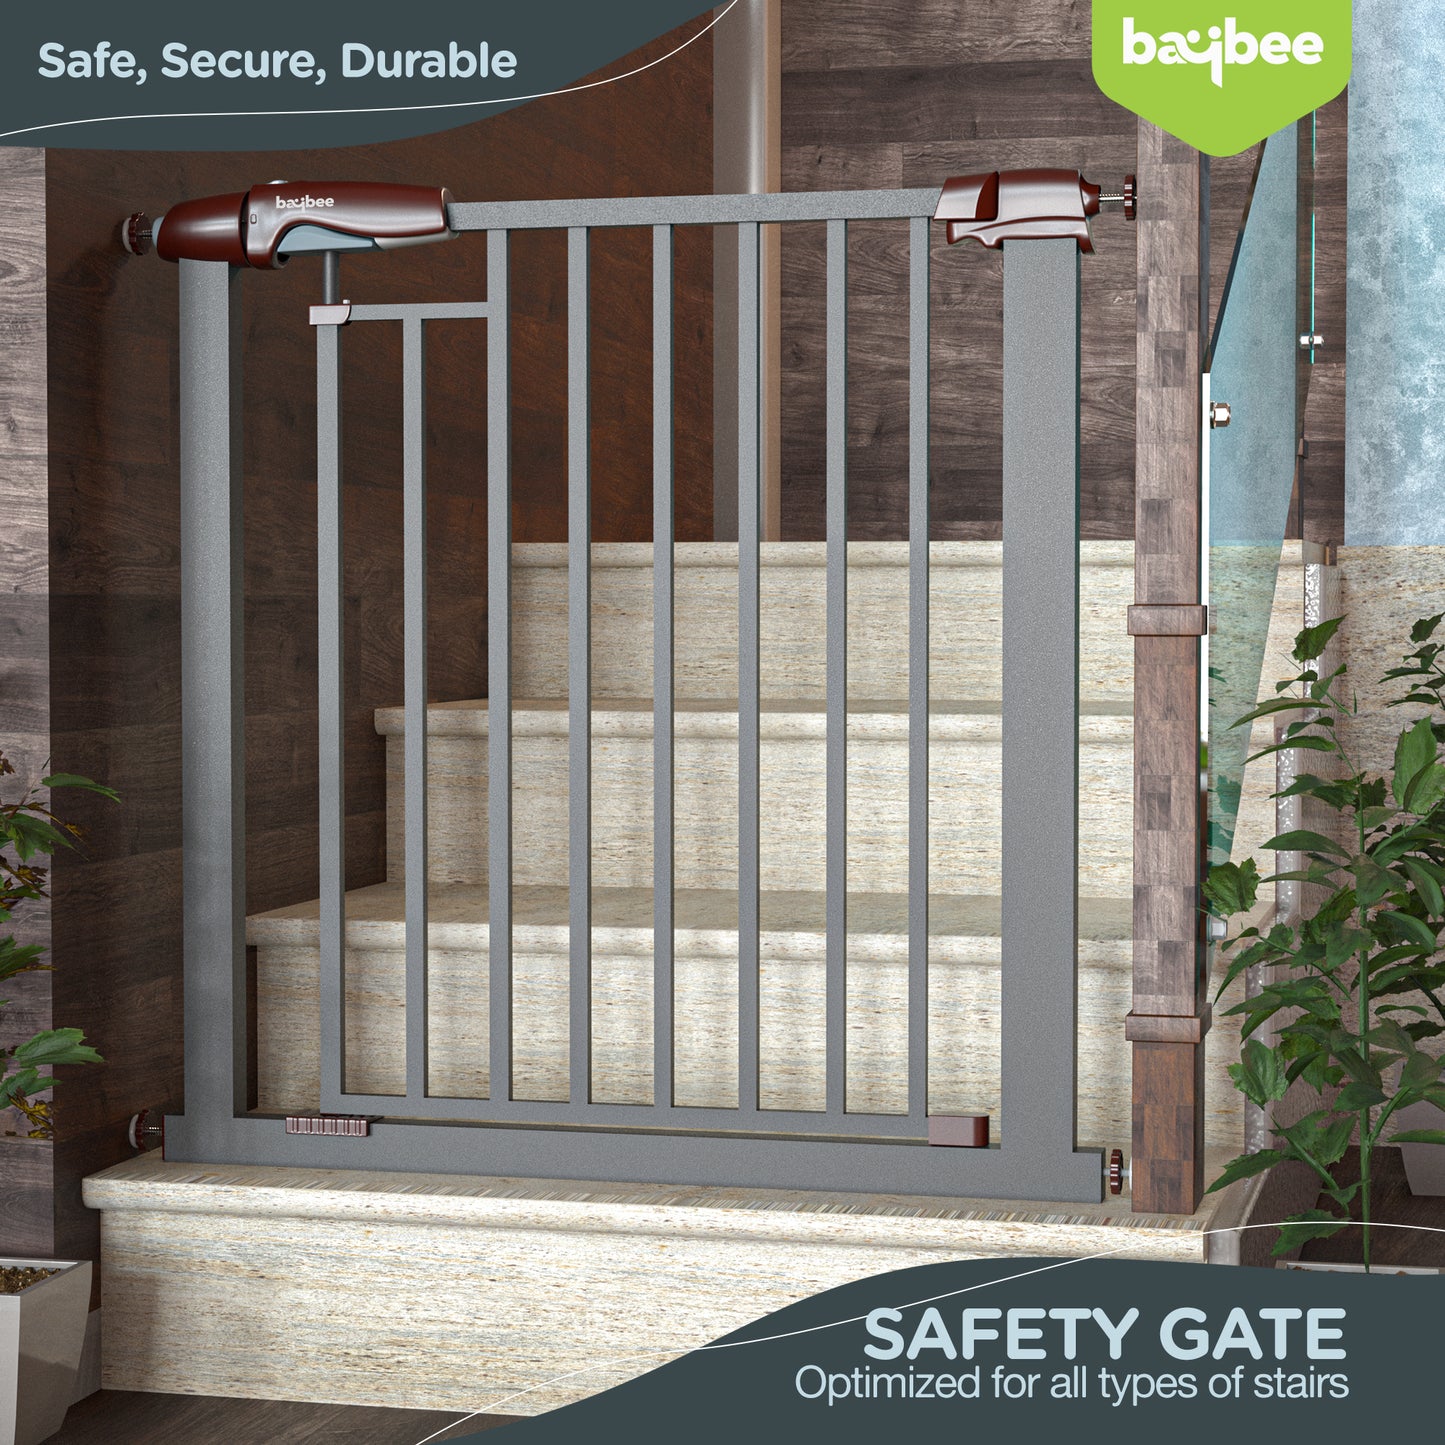 Baybee Auto Close Baby Safety Gate, Extra Tall Durable Baby Fence Barrier Dog Gate (Black + 10Cm)